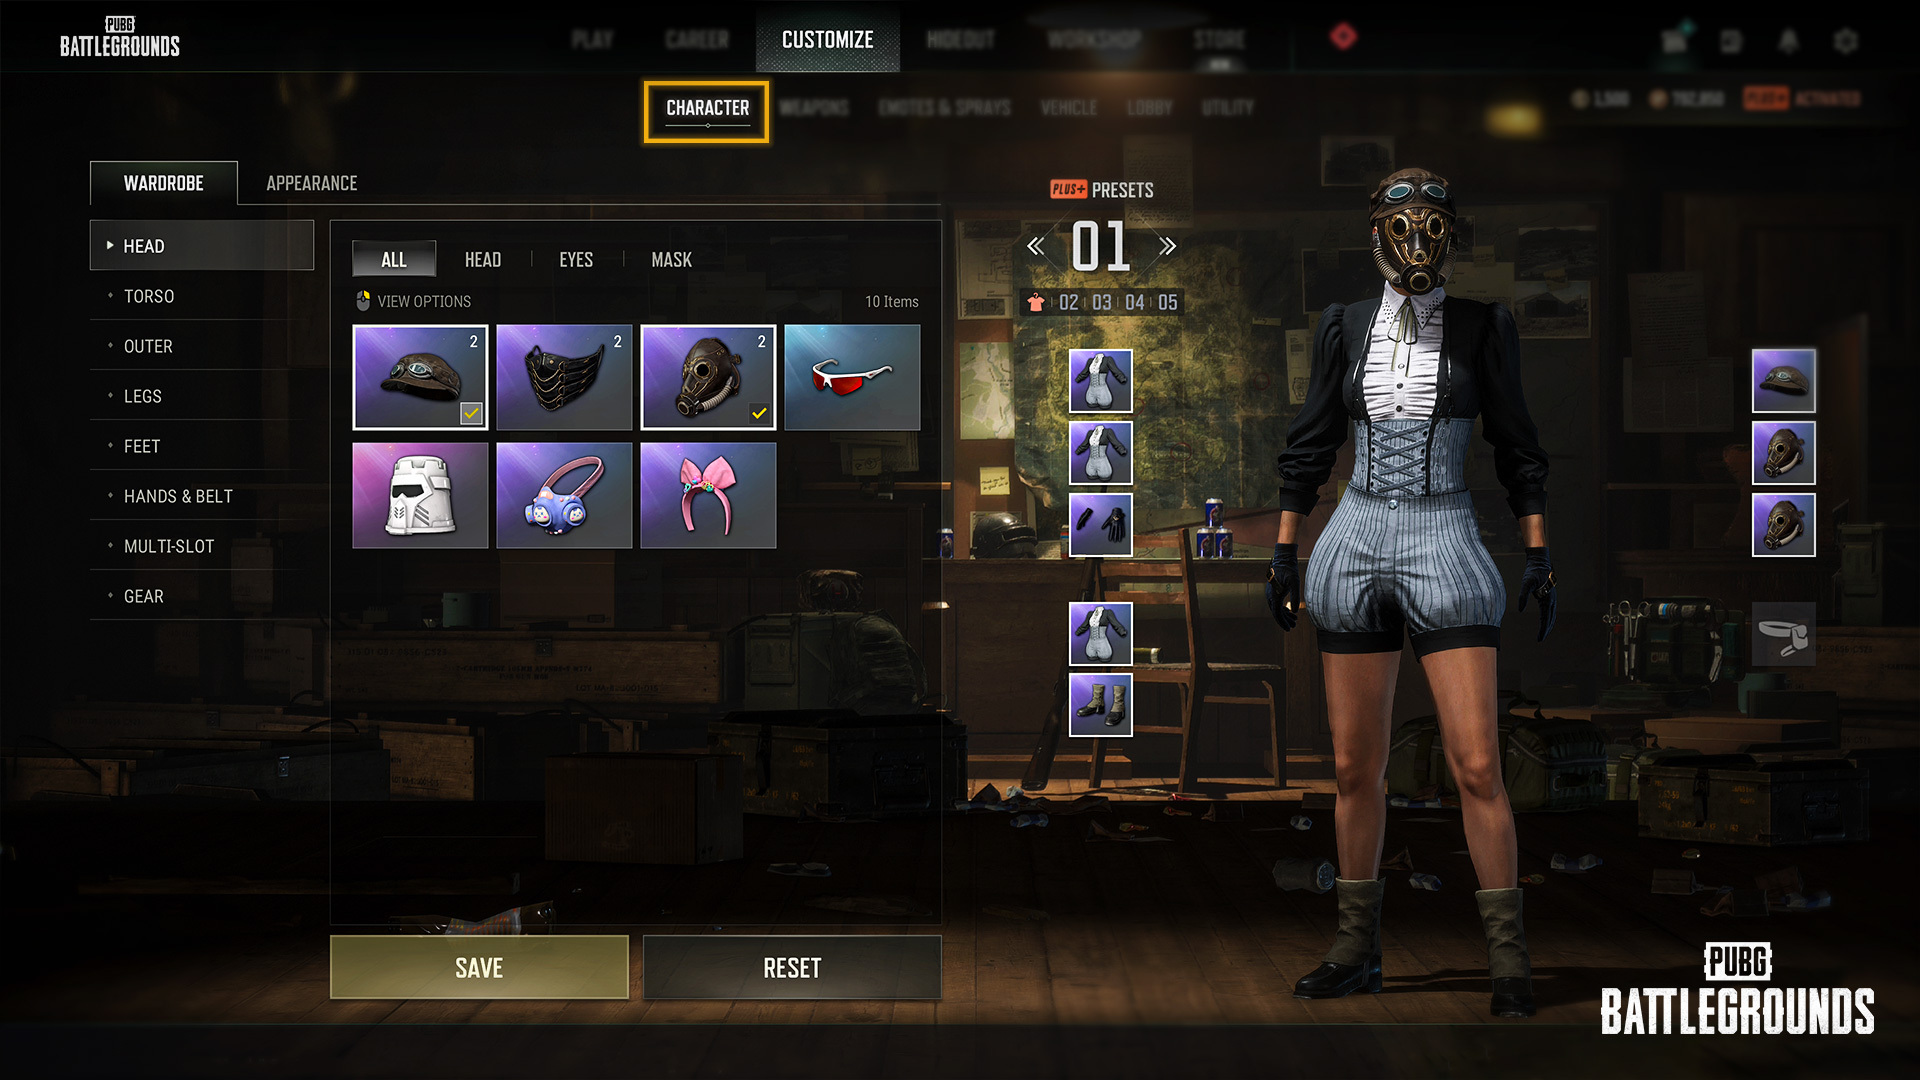 PUBG fans will go mad over this new Garena Free Fire OB 25 update